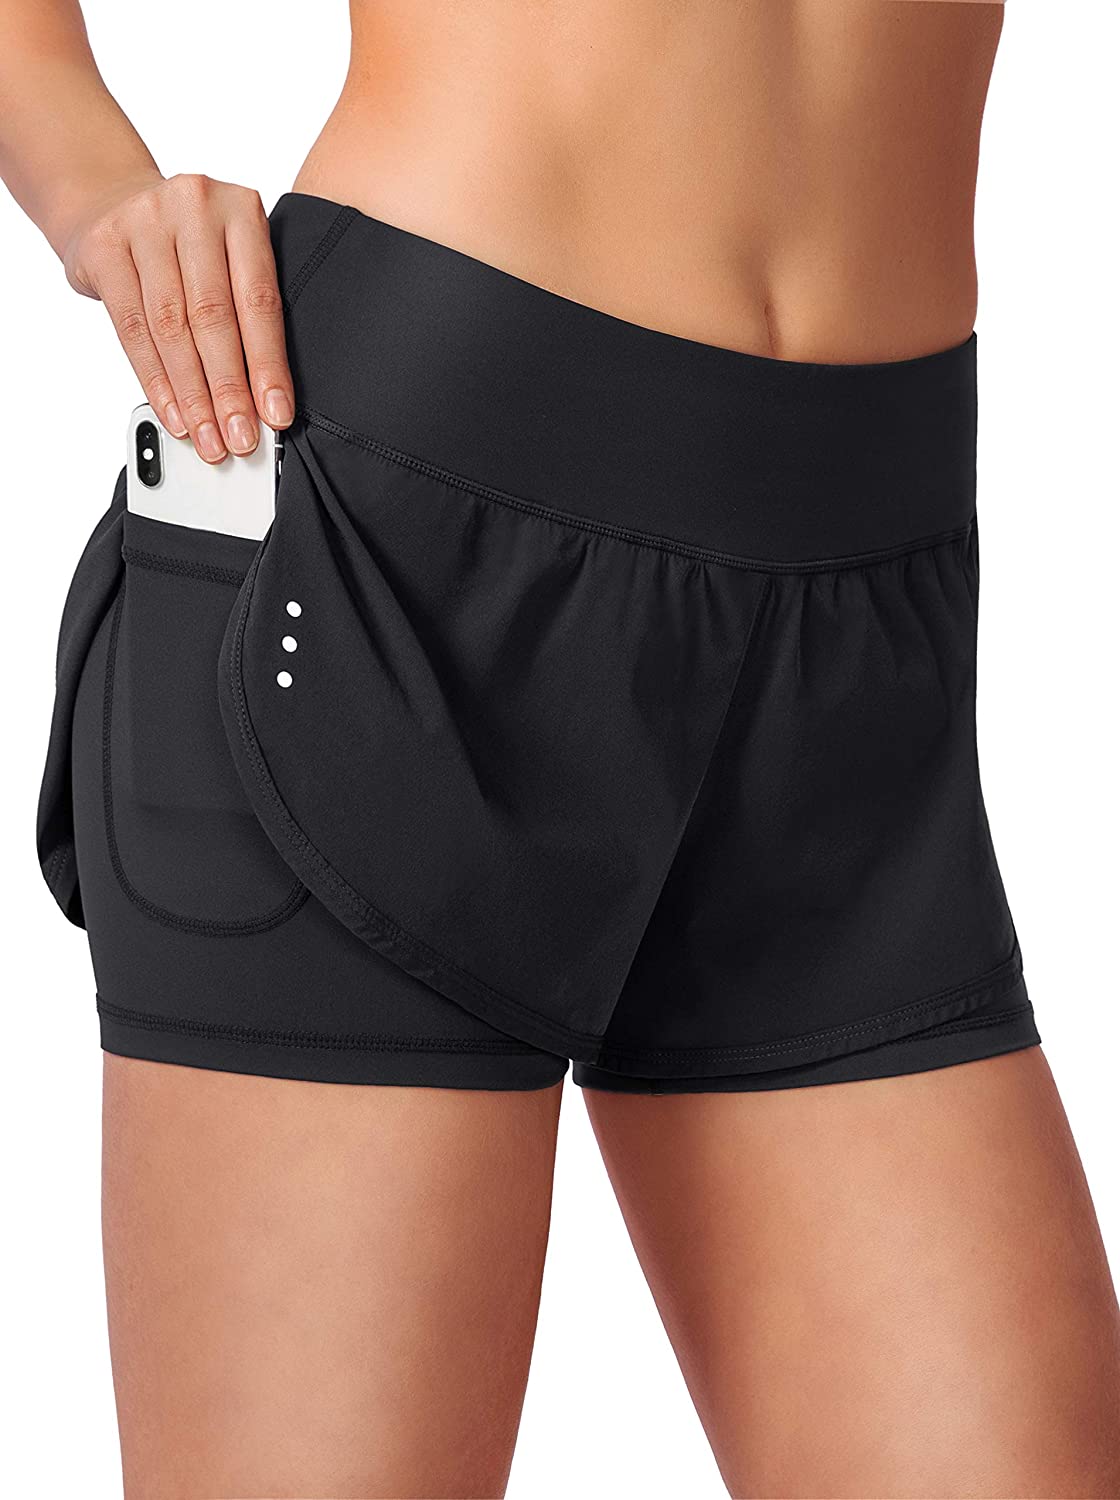 Women Girl Sports Shorts Running Gym Fitness Short Workout Yoga Casual Y 